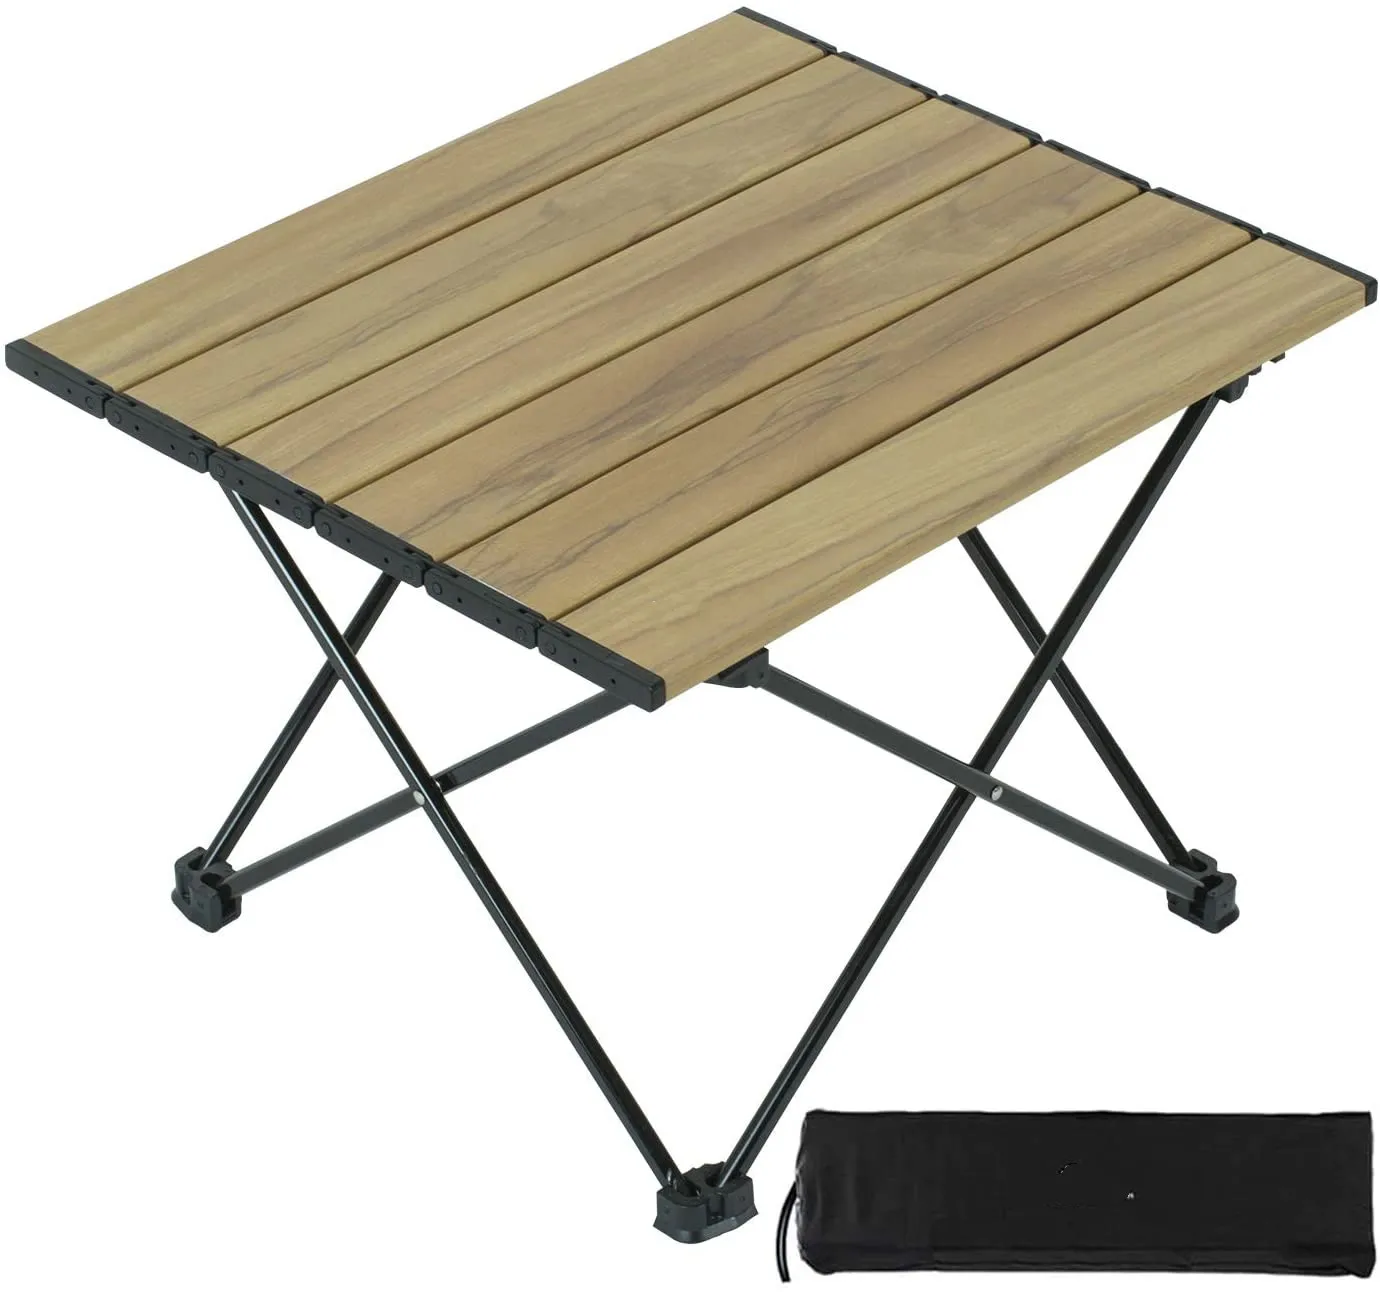 Portable Outdoor Folding Camping Tables 58x58x58cm Lightweight Aluminum Alloy Picnic Table with Storage Bag Outdoor Camping Dining Tables for Camping Fishing Beach Banquet Picnic Party Garden BBQ 